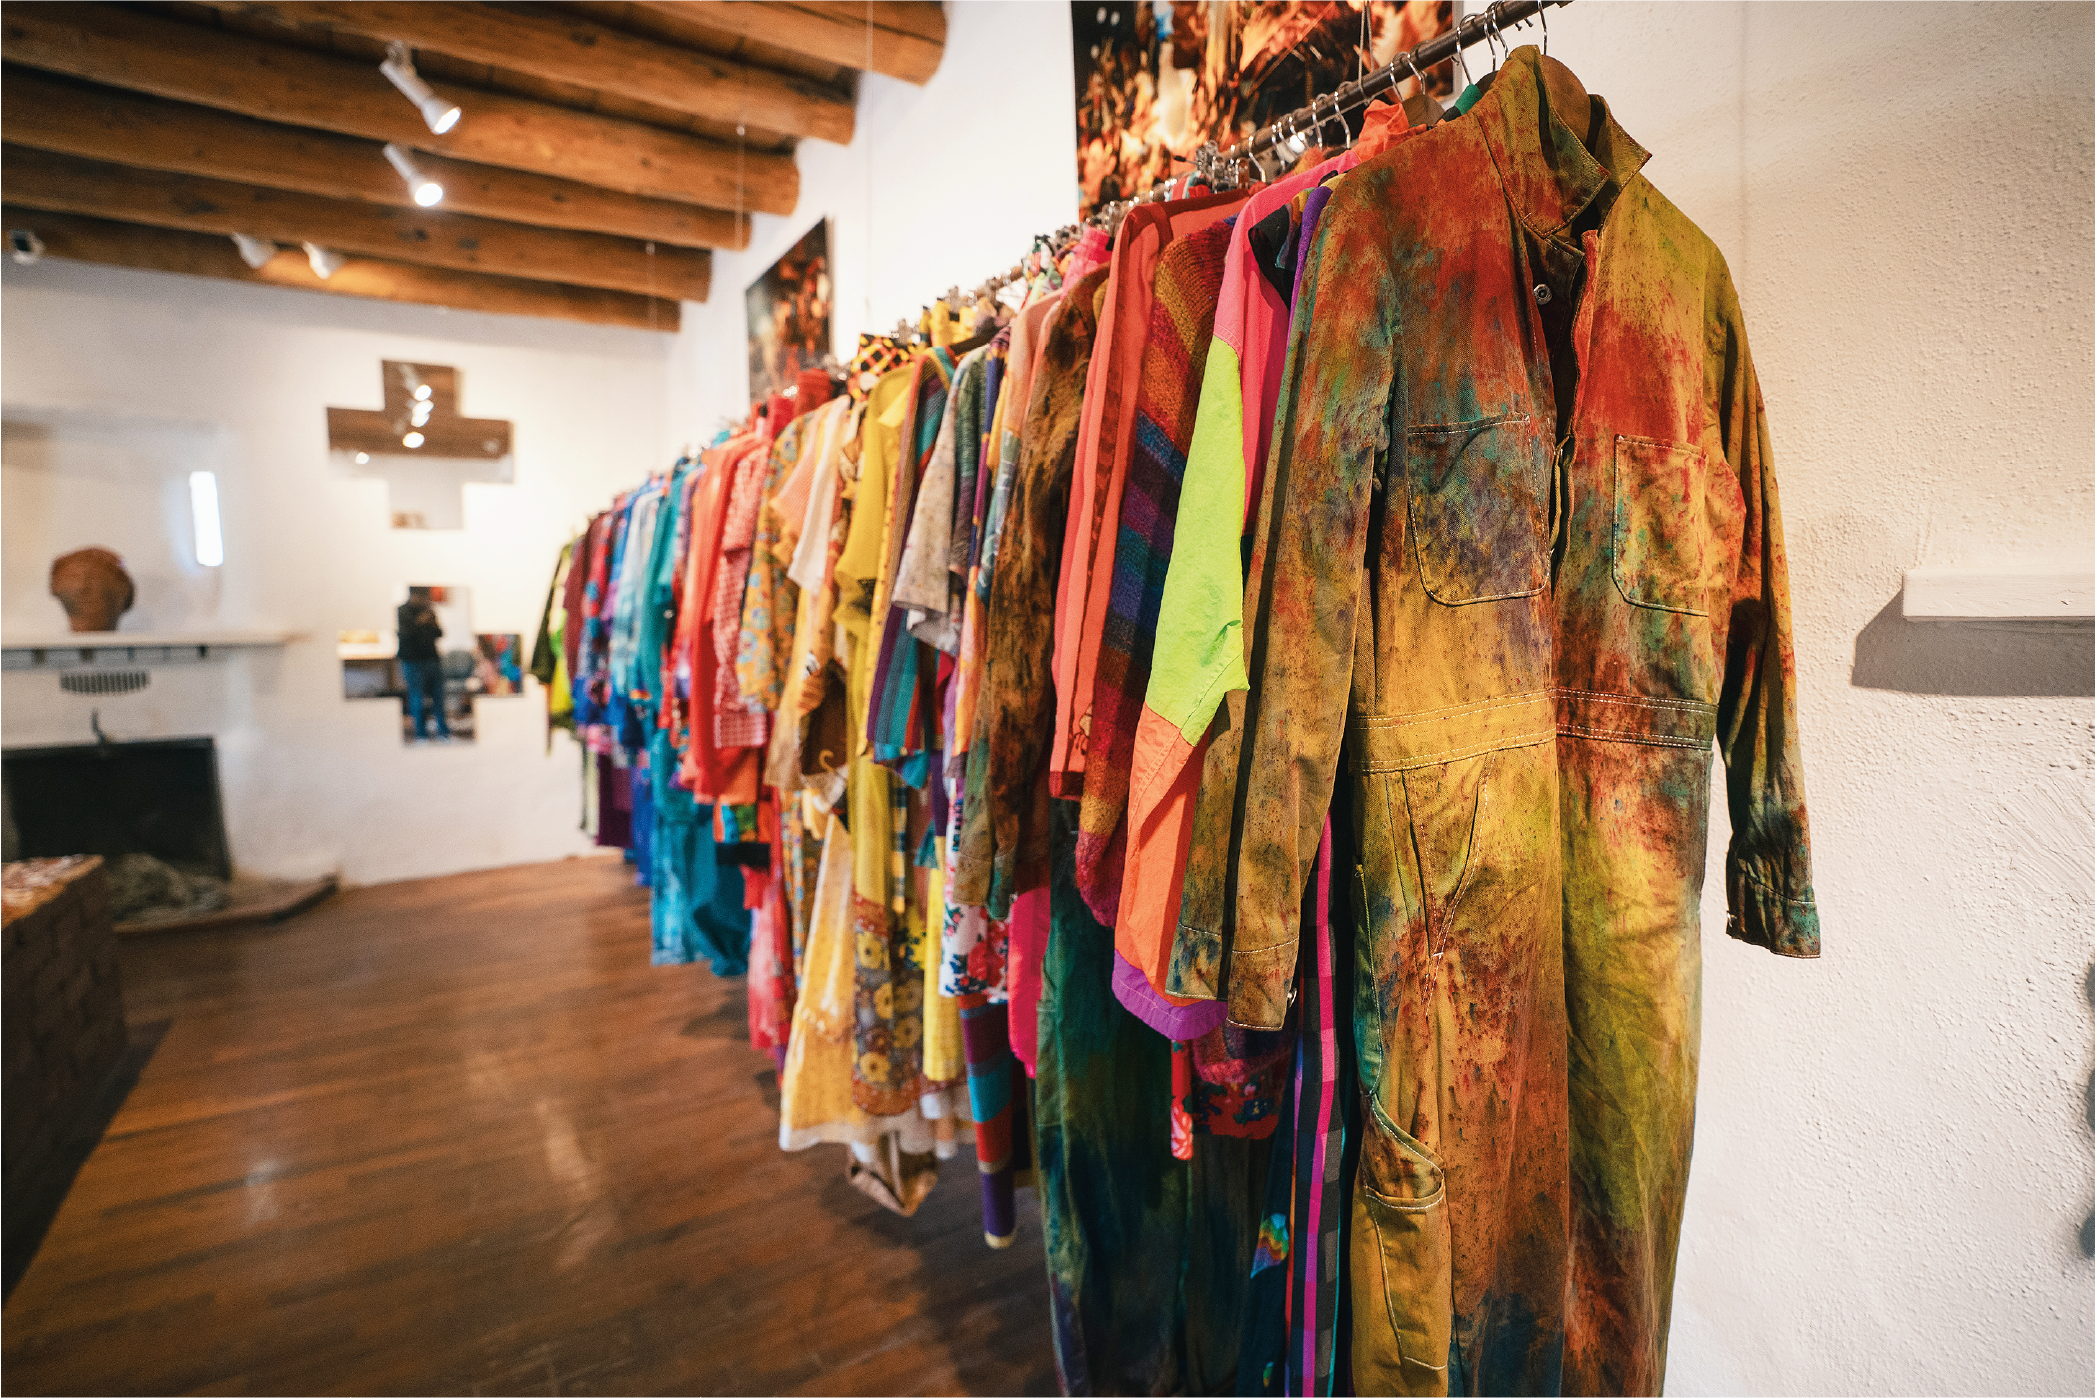  A view of upcycled and dyed clothing inside 4KINSHIP. Photos by Wade Adakai.